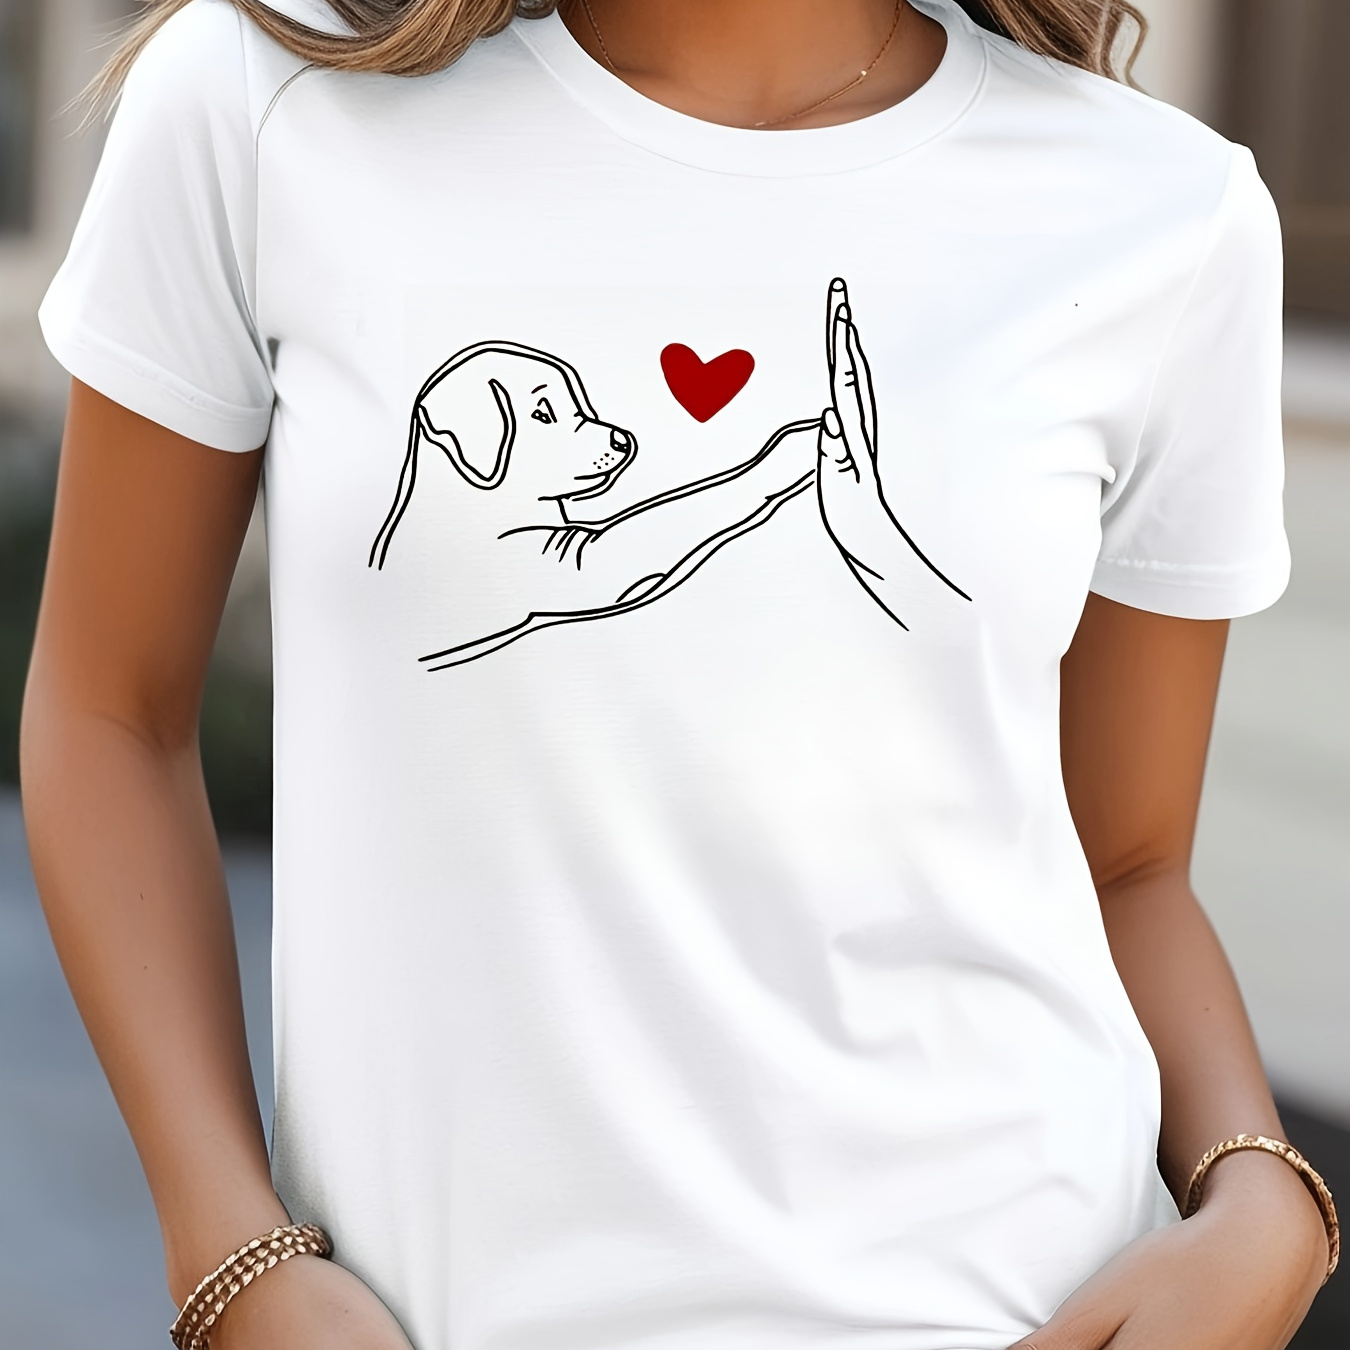 

Women's Casual Short-sleeve T-shirt With Dog High-five And Heart Print, Round Neck Tee For Everyday Wear